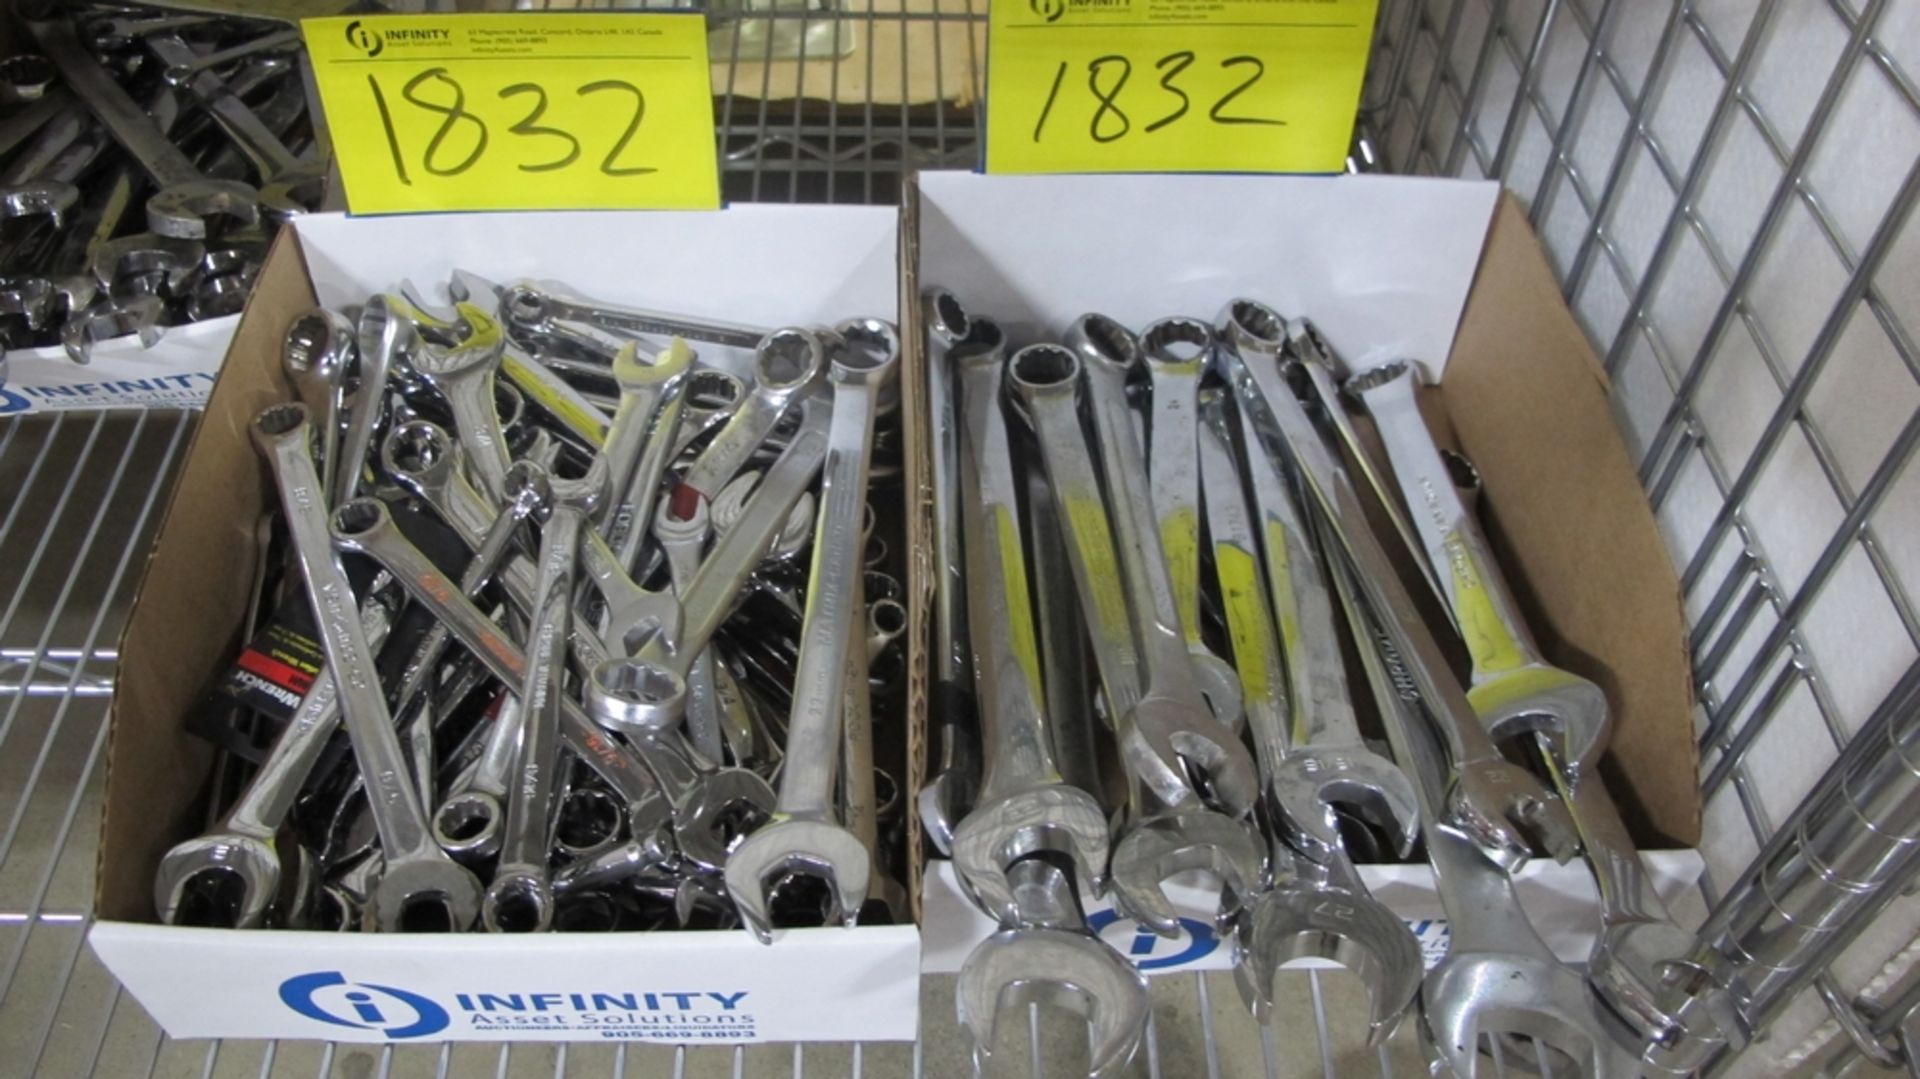 LOT OF 2 WRENCHES (100 SHIRLEY AVE KITCHENER)